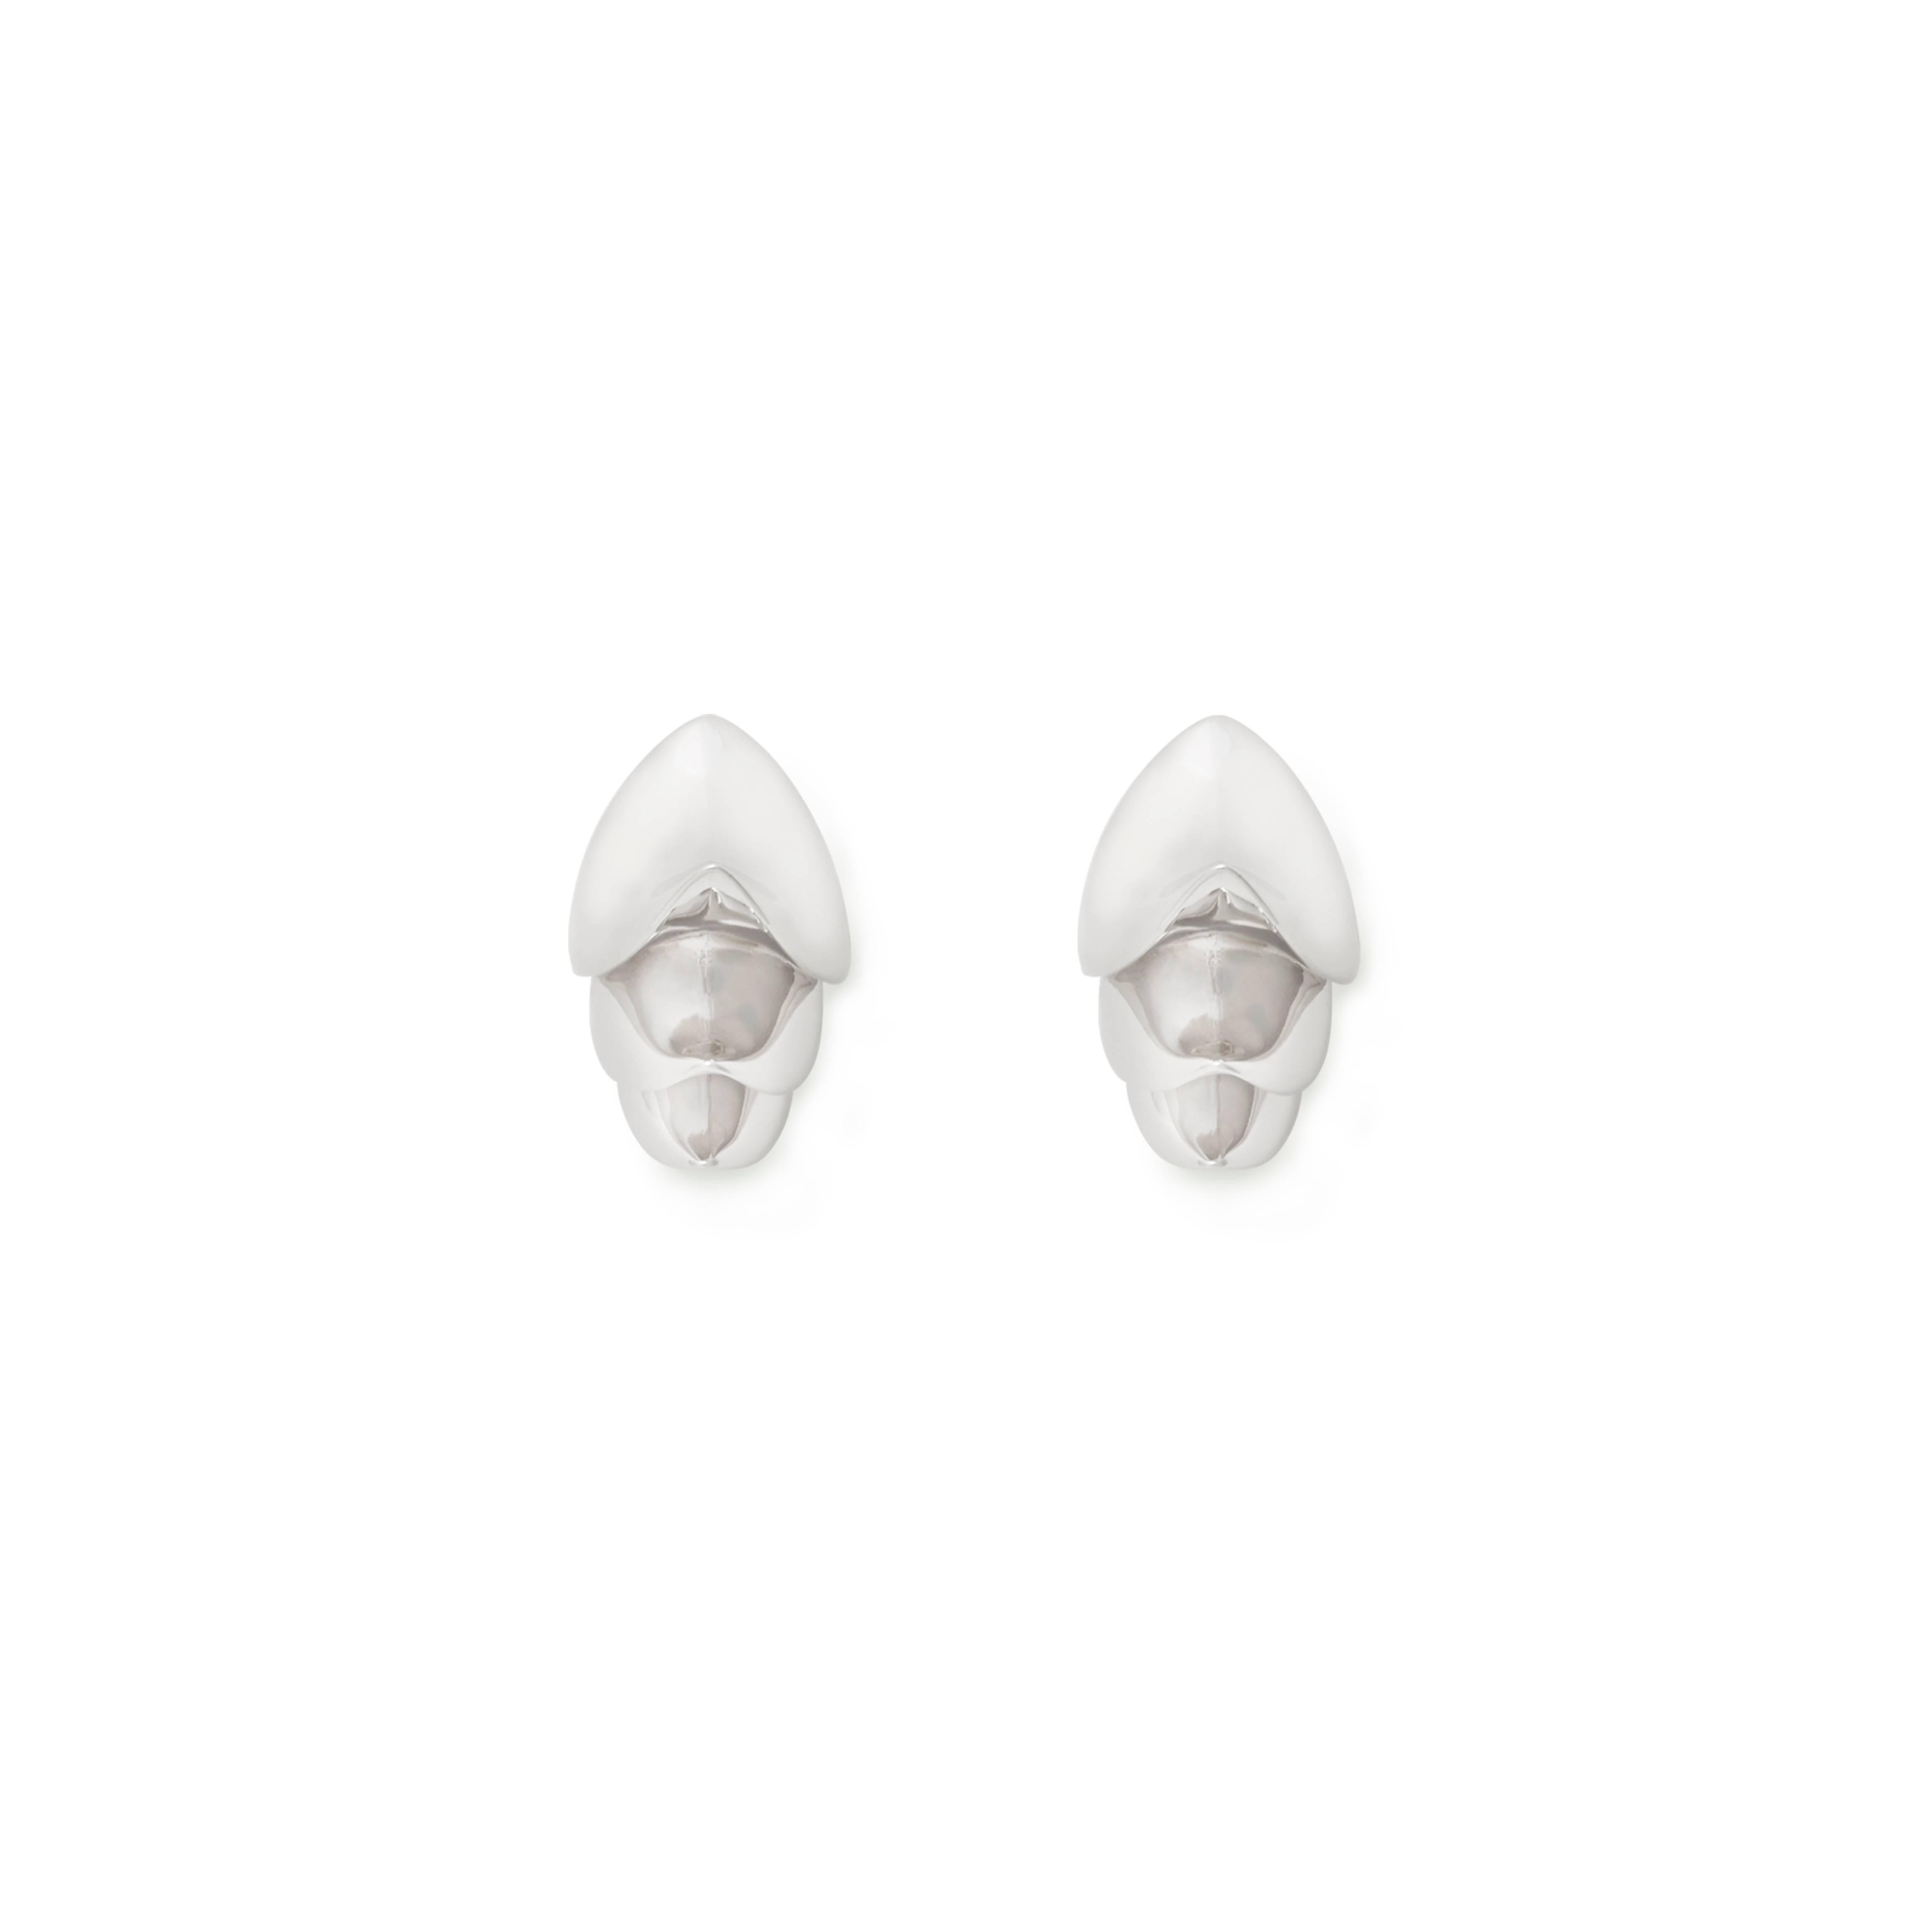 Mistova's Silver Thorn Earrings are light and easy to wear. With their sharp and strong design a statement piece.  Made from high quality sterling silver. 